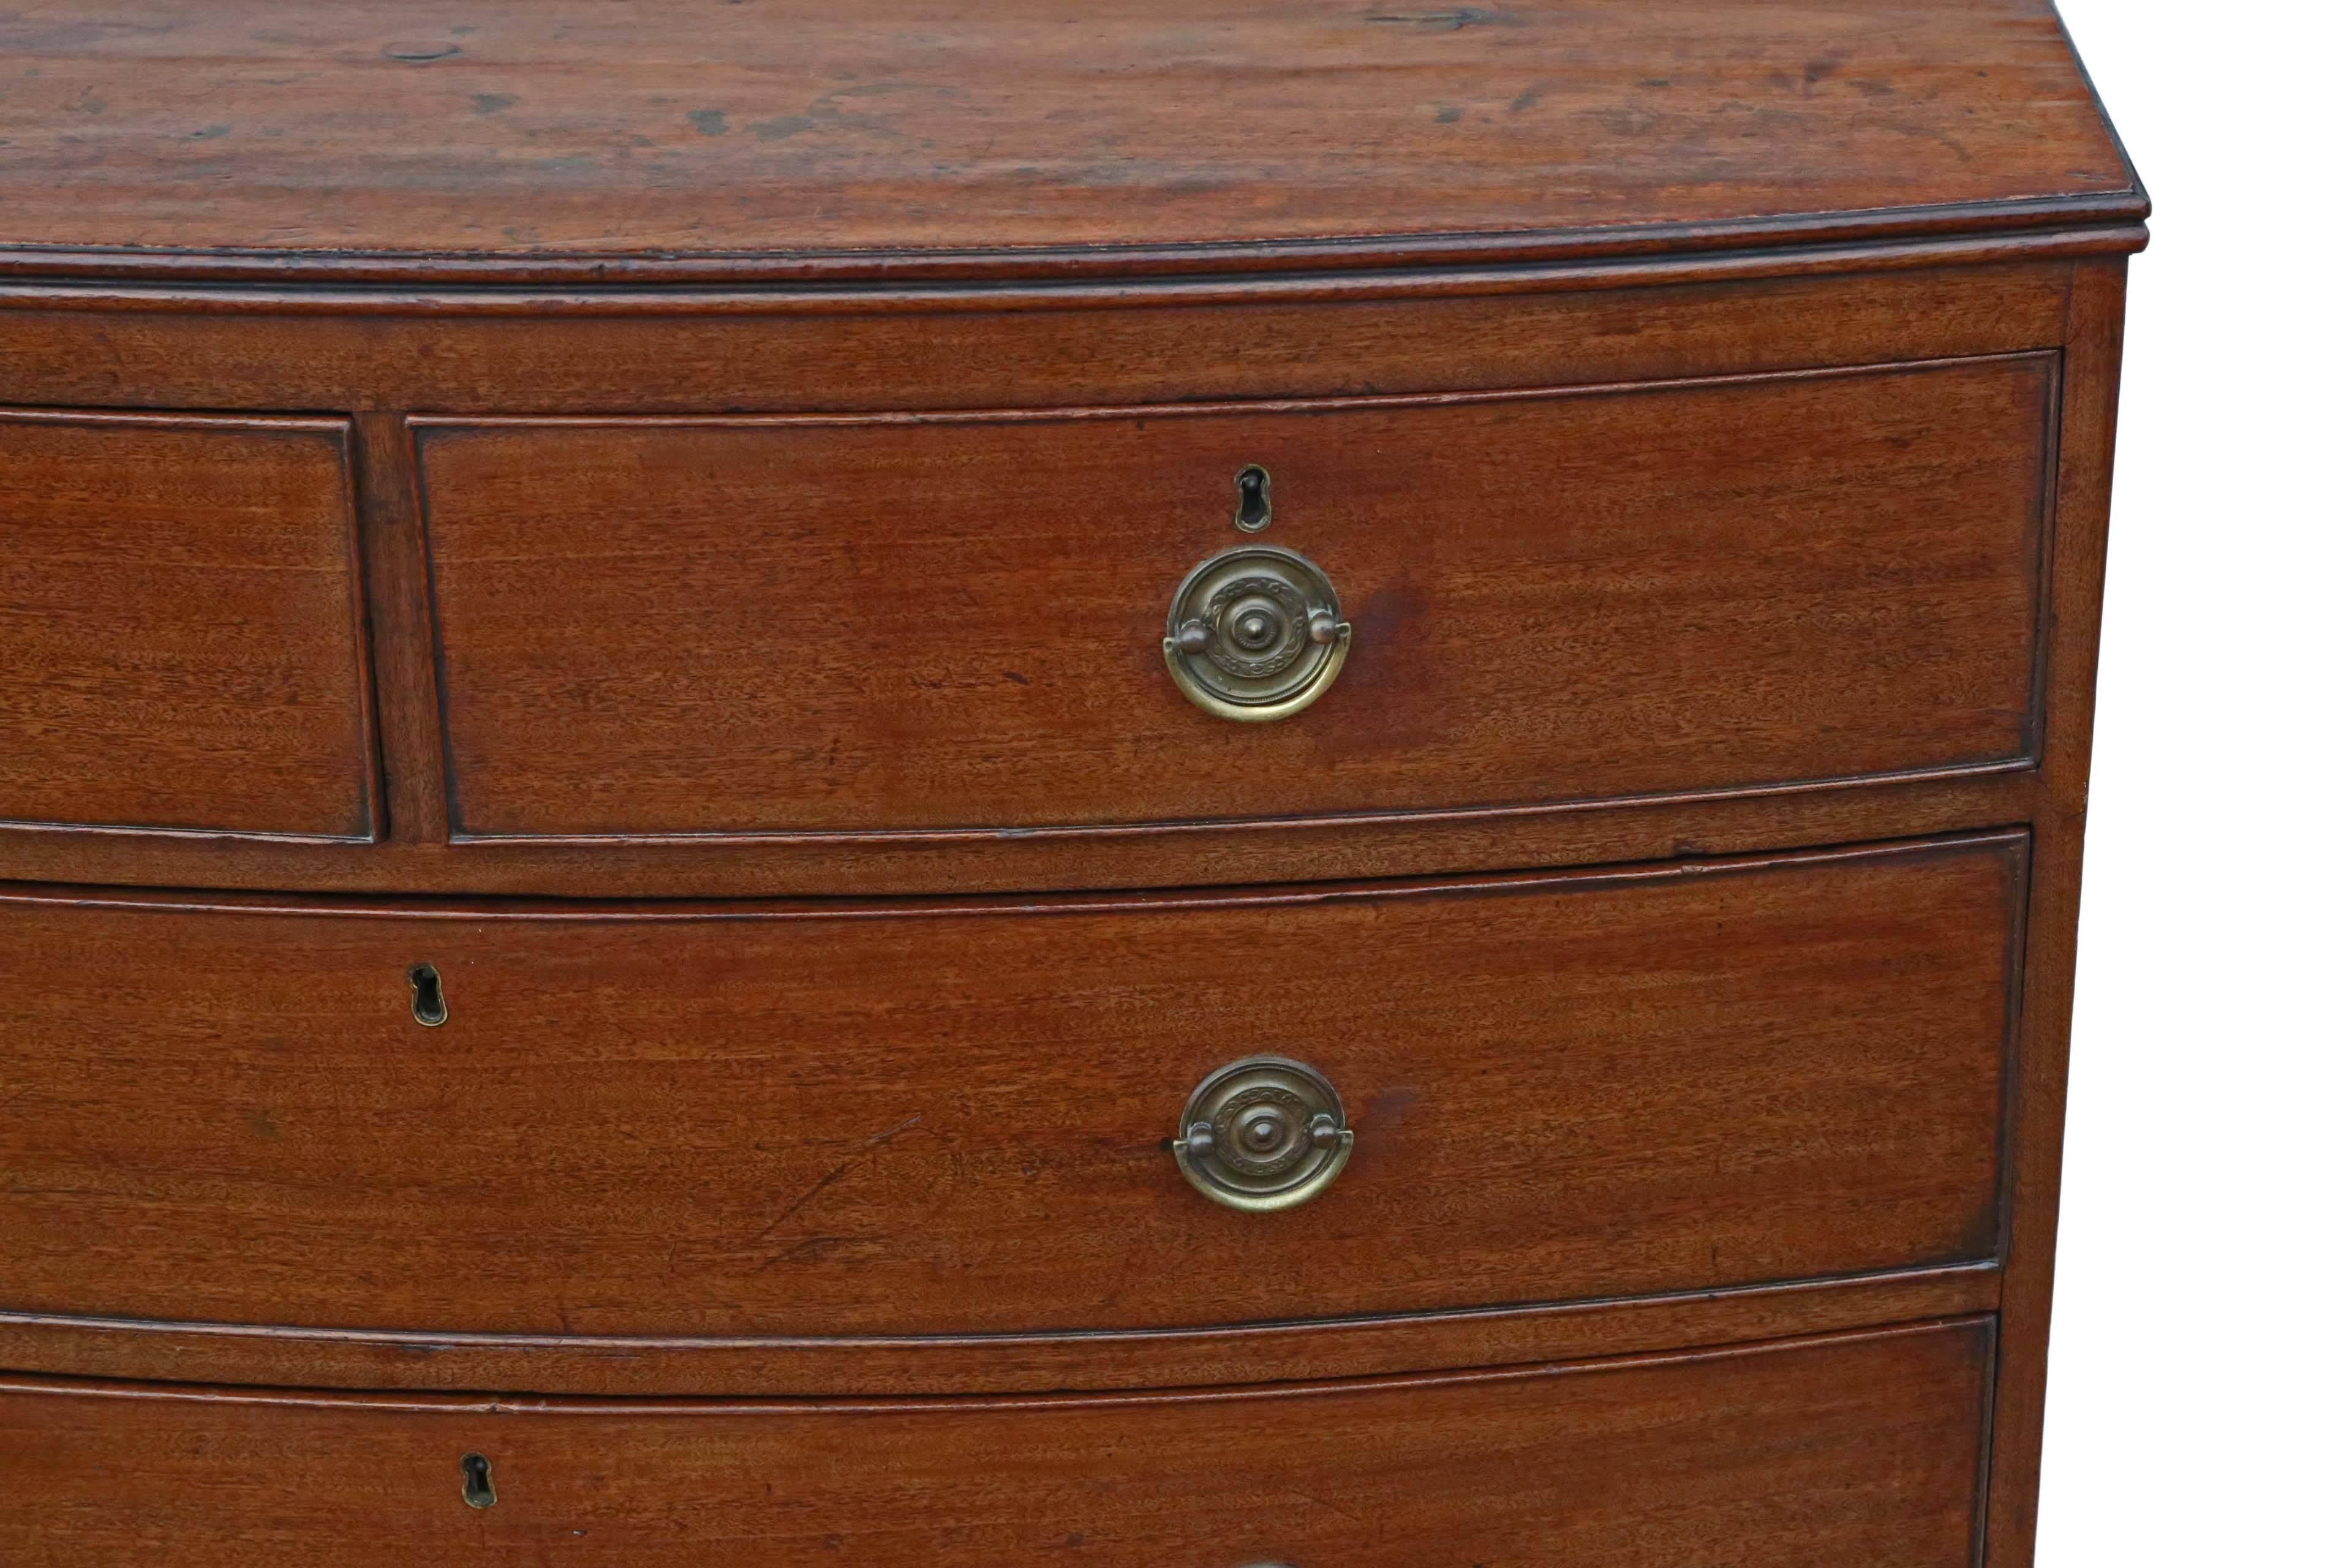 Antique Georgian mahogany bow front chest of drawers, circa 1800

Solid and strong, with no loose joints. Full of age, character and charm. Warm mellow colour.

Mahogany lined drawers, that slide freely.

Overall maximum dimensions: 106 cm W x